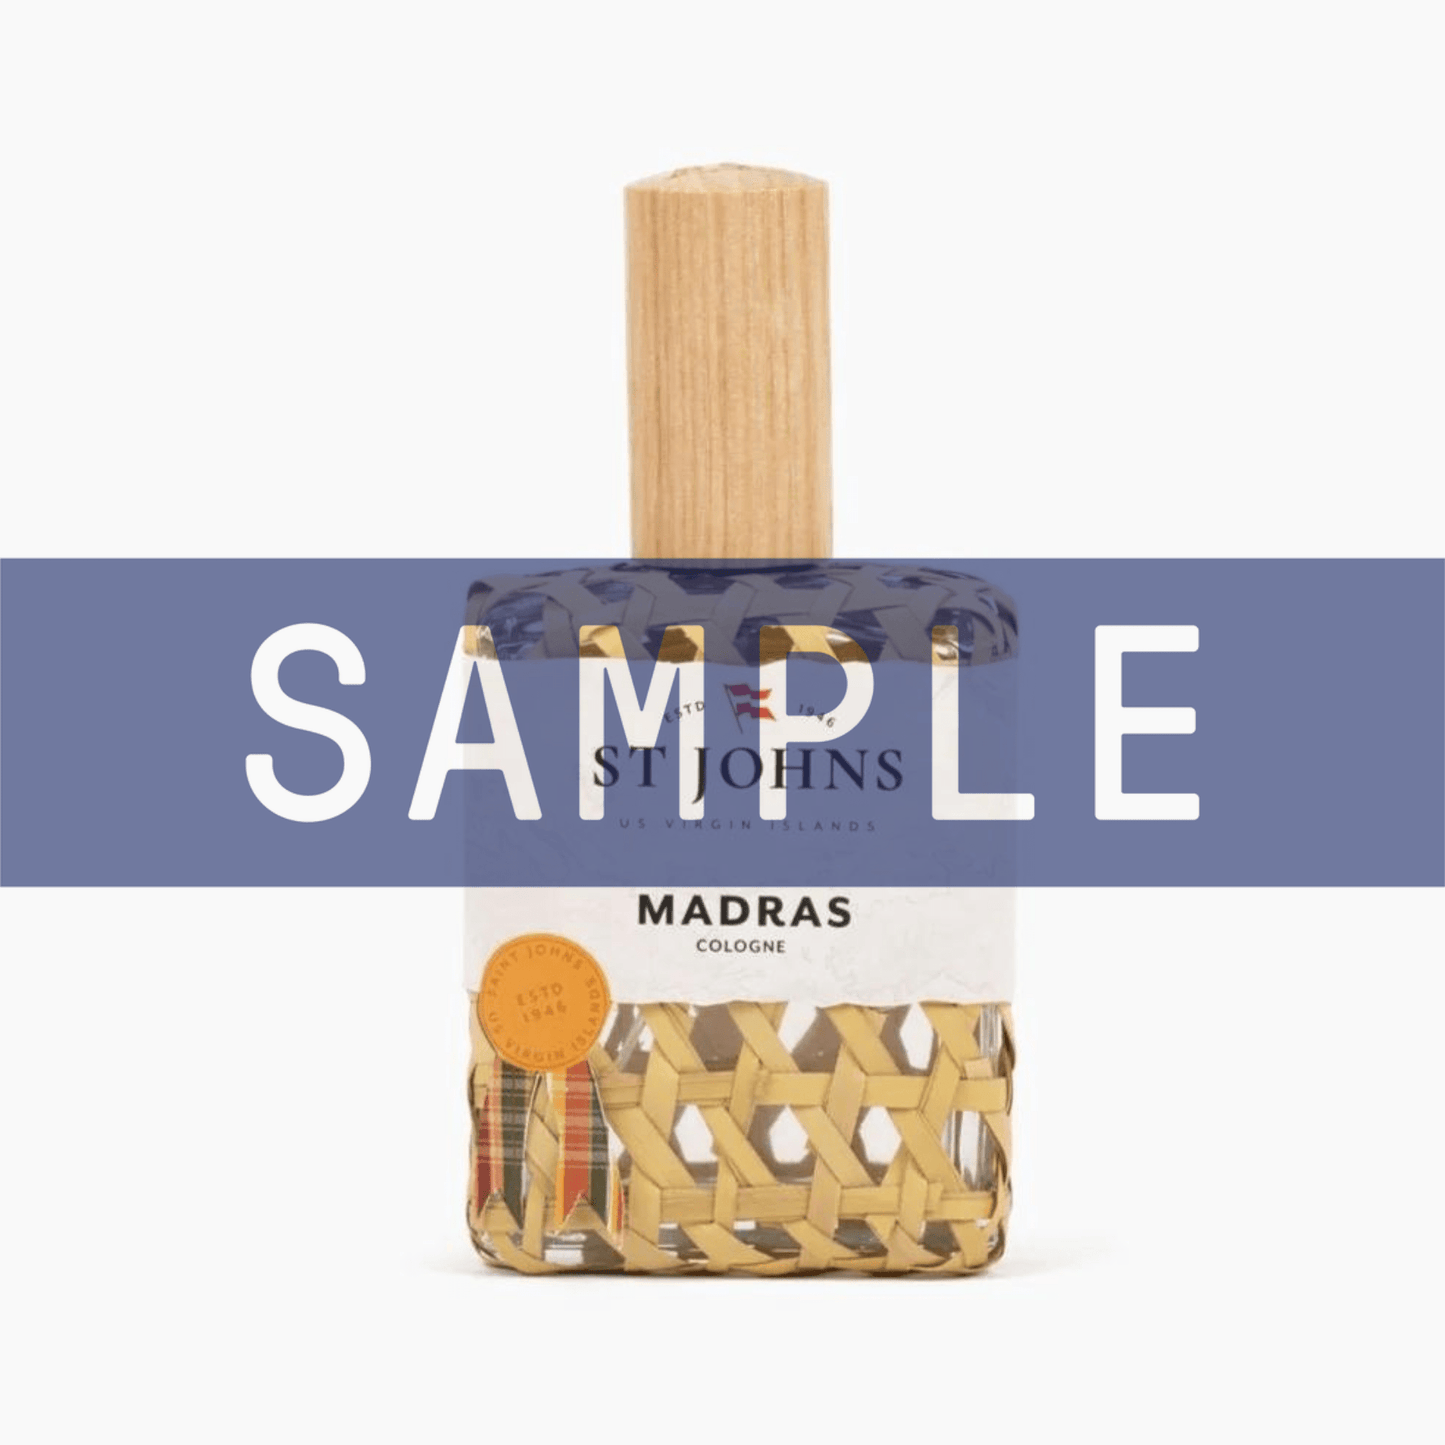 Primary Image of Sample - Madras Cologne